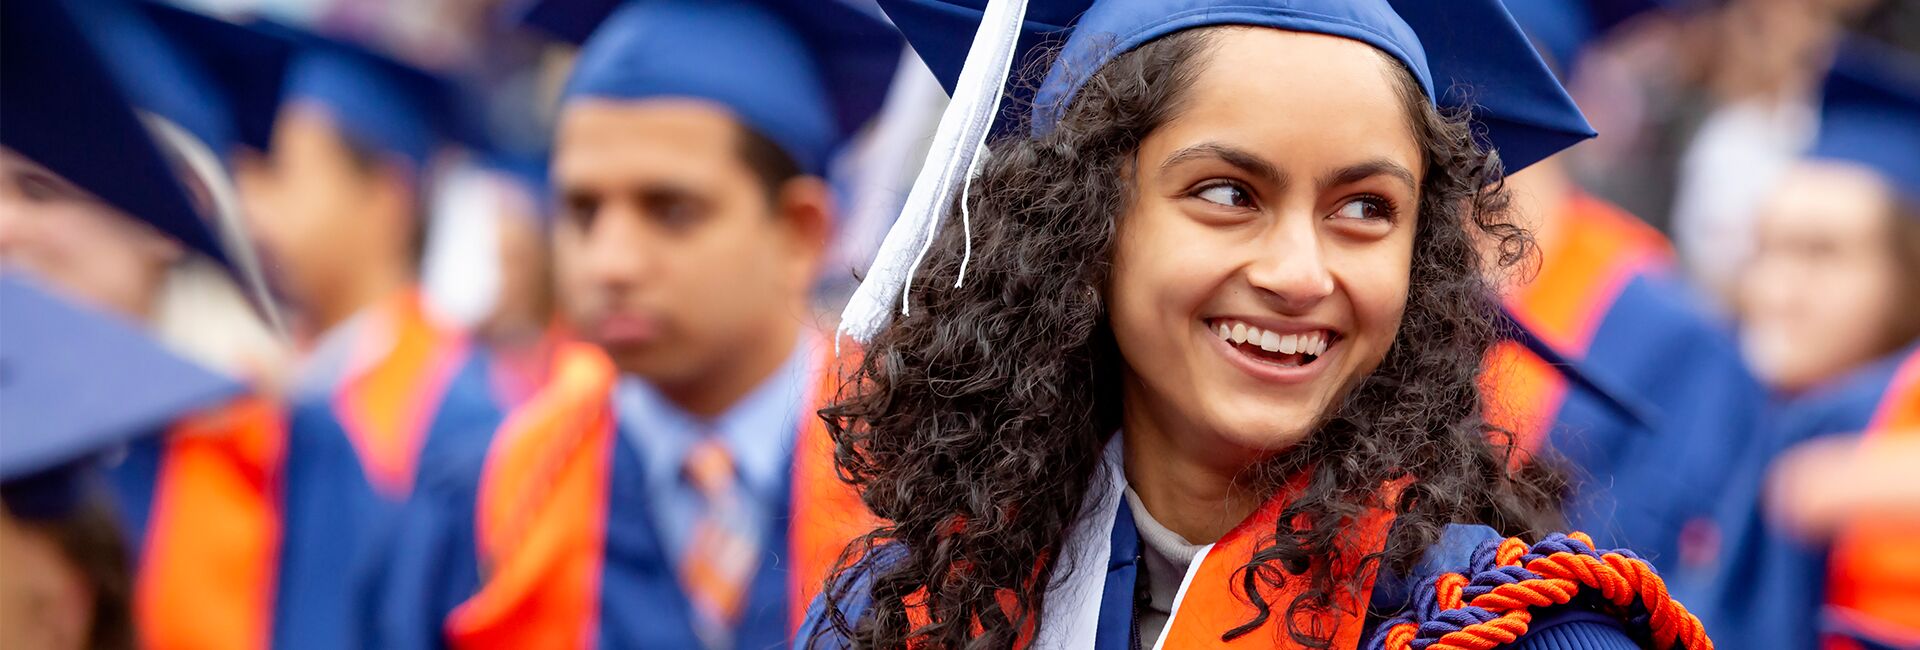 A student wearing a cap and gown smiles